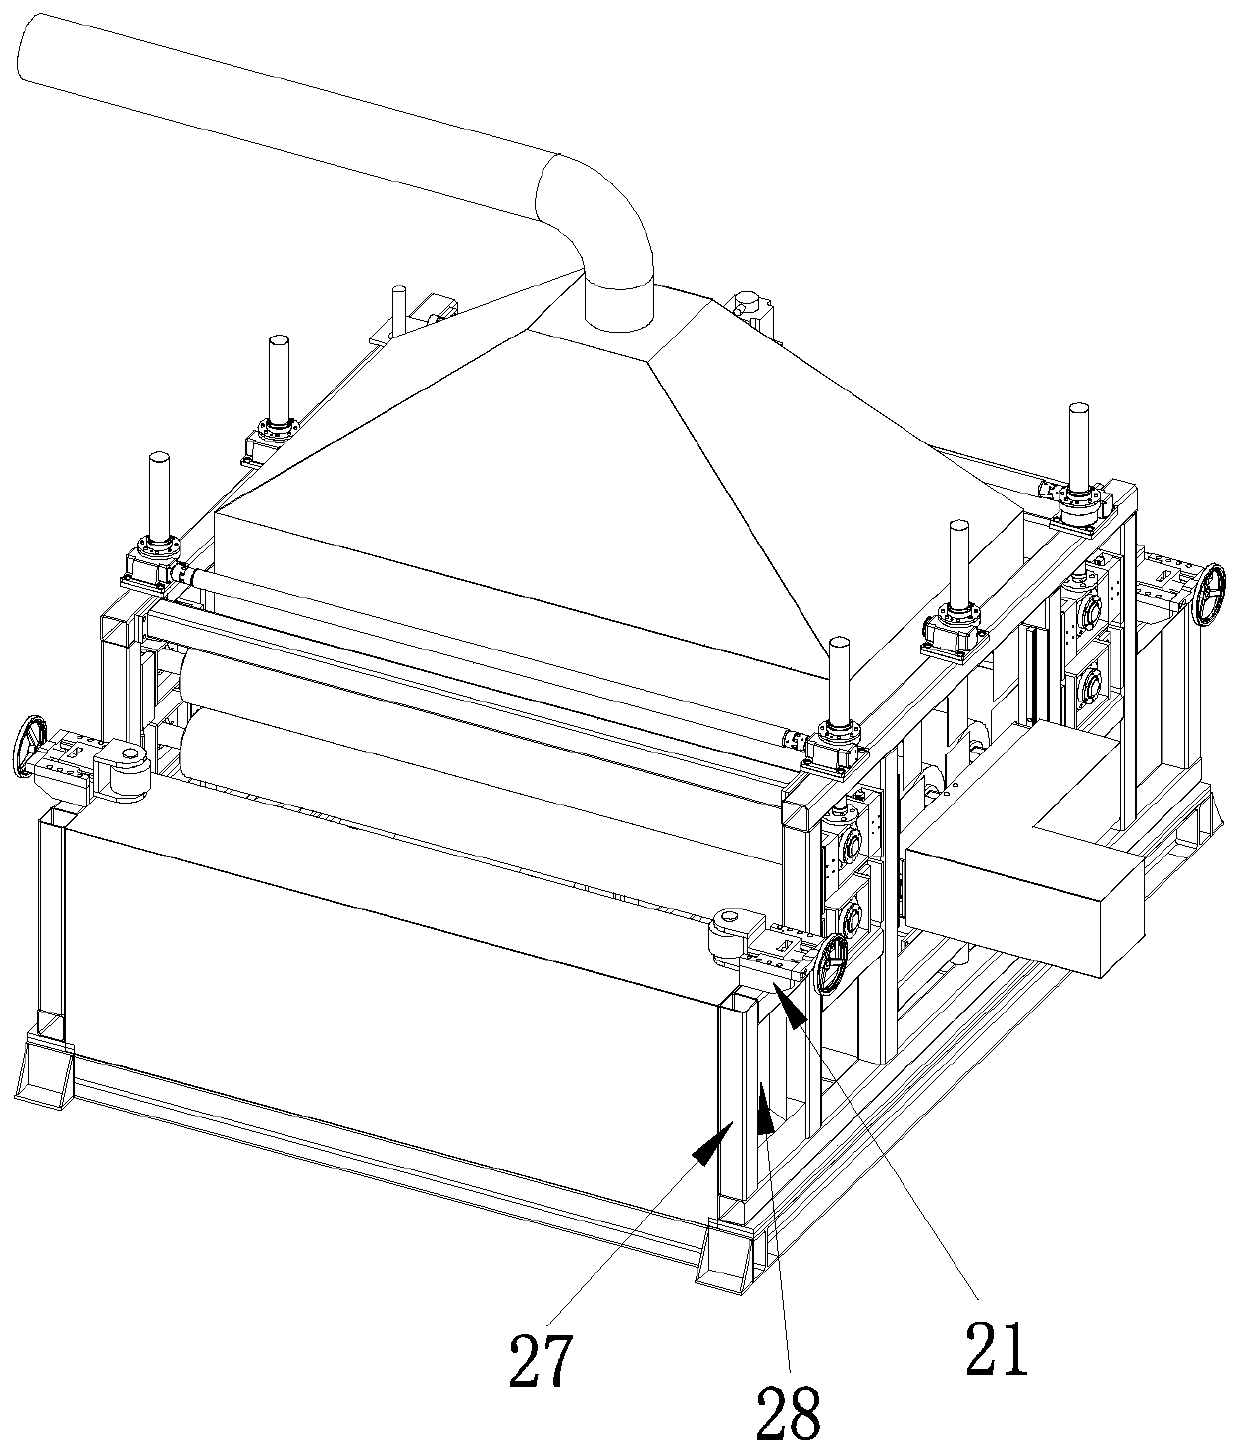 Intelligent steel plate production device